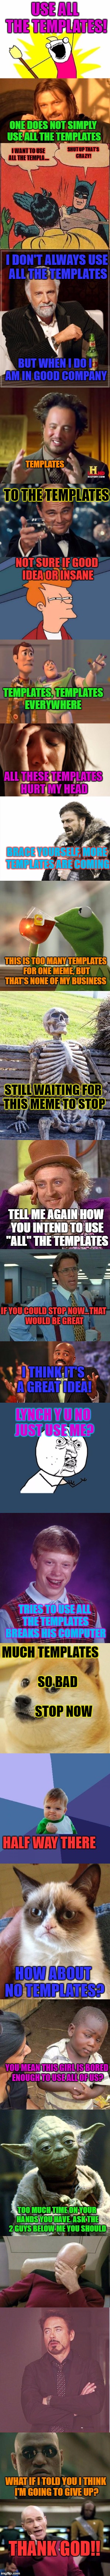 Well, That Escalated Quickly | USE ALL THE TEMPLATES! ONE DOES NOT SIMPLY USE ALL THE TEMPLATES; SHUT UP THAT'S CRAZY! I WANT TO USE ALL THE TEMPLA.... I DON'T ALWAYS USE ALL THE TEMPLATES; BUT WHEN I DO I AM IN GOOD COMPANY; TEMPLATES; TO THE TEMPLATES; NOT SURE IF GOOD IDEA OR INSANE; TEMPLATES, TEMPLATES EVERYWHERE; ALL THESE TEMPLATES HURT MY HEAD; BRACE YOURSELF, MORE TEMPLATES ARE COMING; THIS IS TOO MANY TEMPLATES FOR ONE MEME, BUT THAT'S NONE OF MY BUSINESS; STILL WAITING FOR THIS MEME TO STOP; TELL ME AGAIN HOW YOU INTEND TO USE "ALL" THE TEMPLATES; IF YOU COULD STOP NOW...THAT WOULD BE GREAT; I THINK IT'S A GREAT IDEA! LYNCH Y U NO JUST USE ME? TRIES TO USE ALL THE TEMPLATES BREAKS HIS COMPUTER; MUCH TEMPLATES 
                SO BAD
                          STOP NOW; HALF WAY THERE; HOW ABOUT NO TEMPLATES? YOU MEAN THIS GIRL IS BORED ENOUGH TO USE ALL OF US? TOO MUCH TIME ON YOUR HANDS YOU HAVE. ASK THE 2 GUYS BELOW ME YOU SHOULD; WHAT IF I TOLD YOU I THINK I'M GOING TO GIVE UP? THANK GOD!! | image tagged in memes,lol,templates,still a better love story than twilight,lynch1979 | made w/ Imgflip meme maker